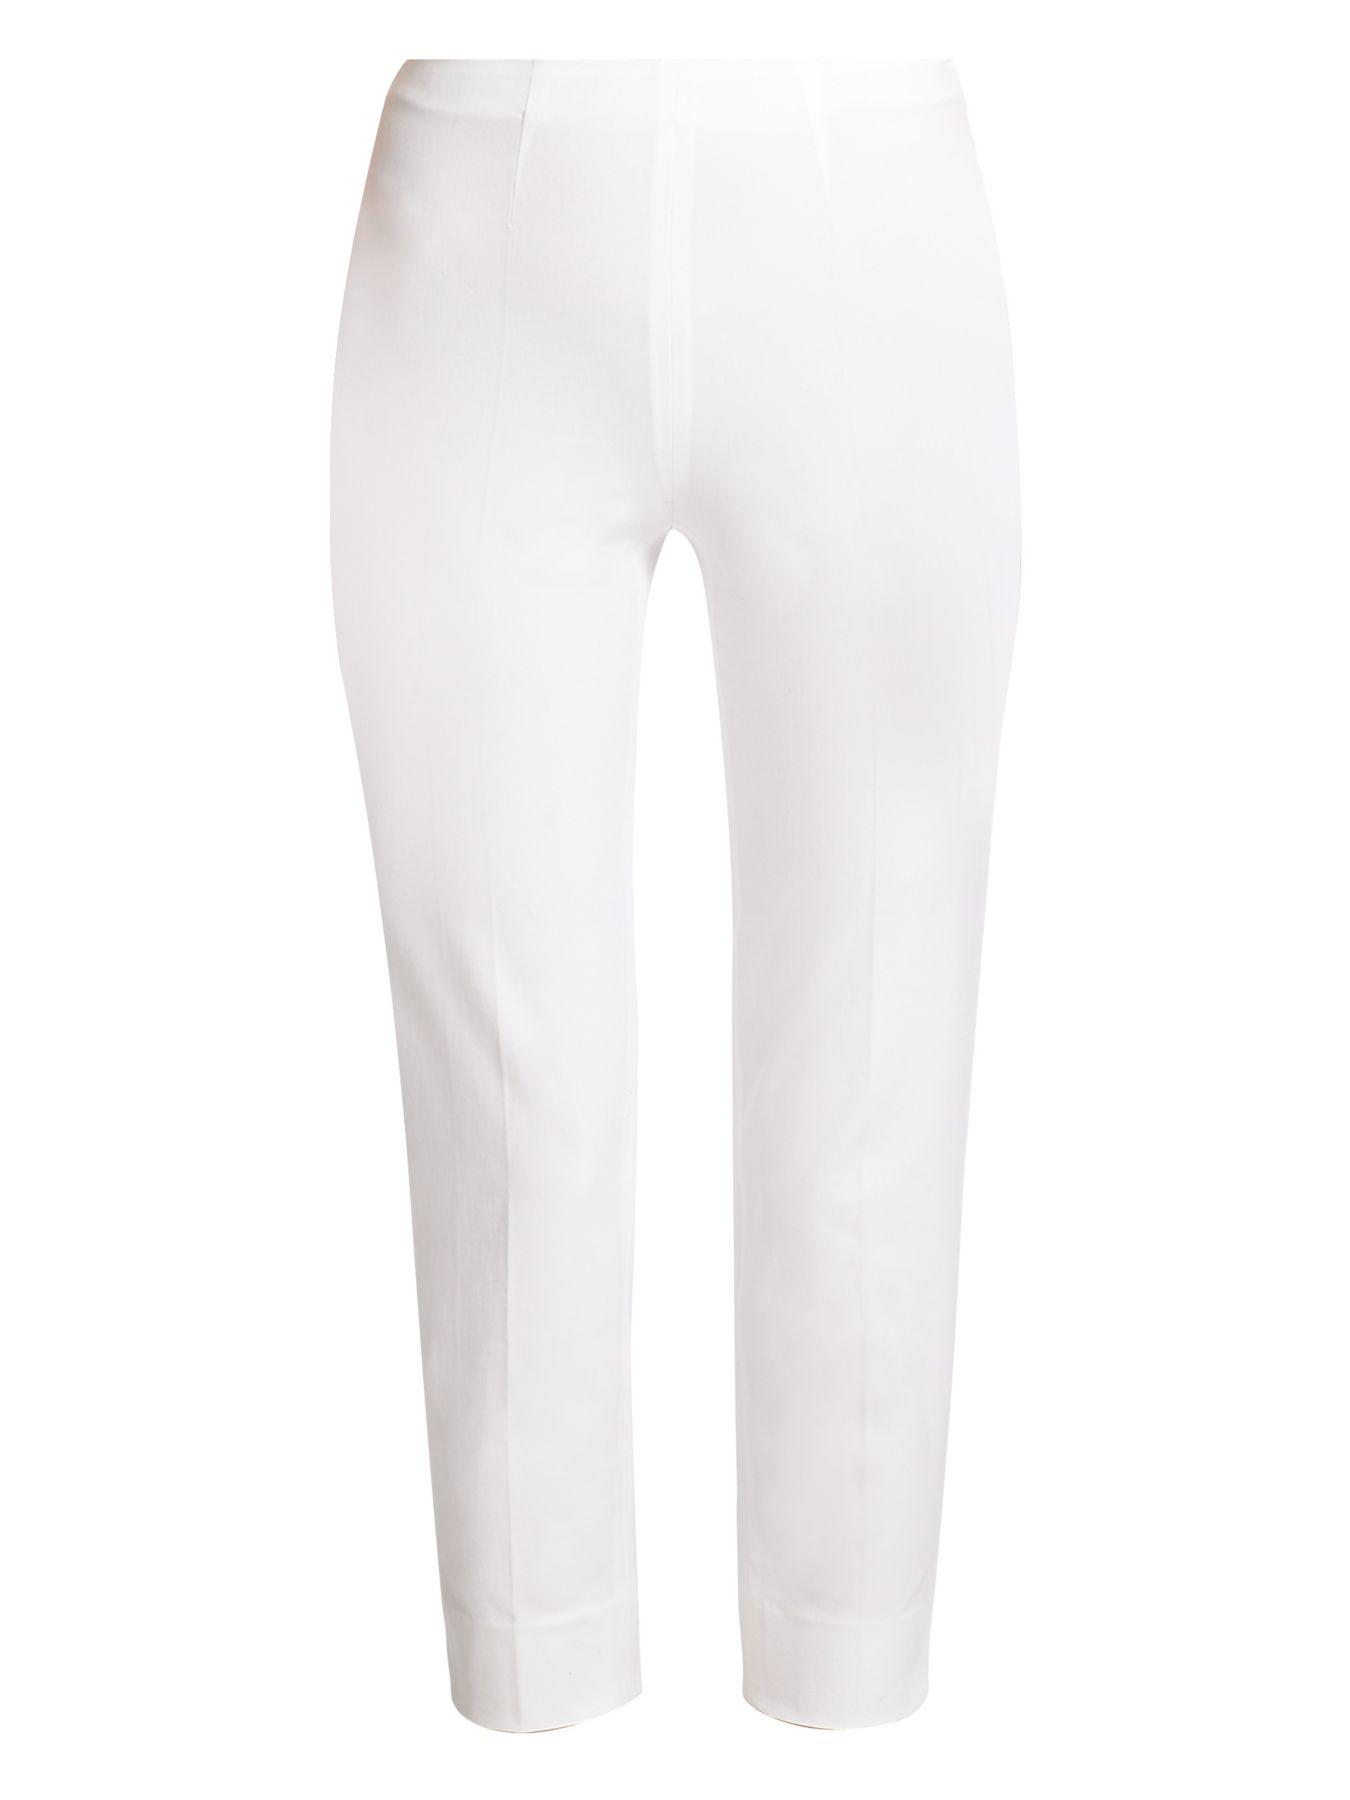 Piazza Sempione Audrey Cropped Cotton Pants in White - Lyst